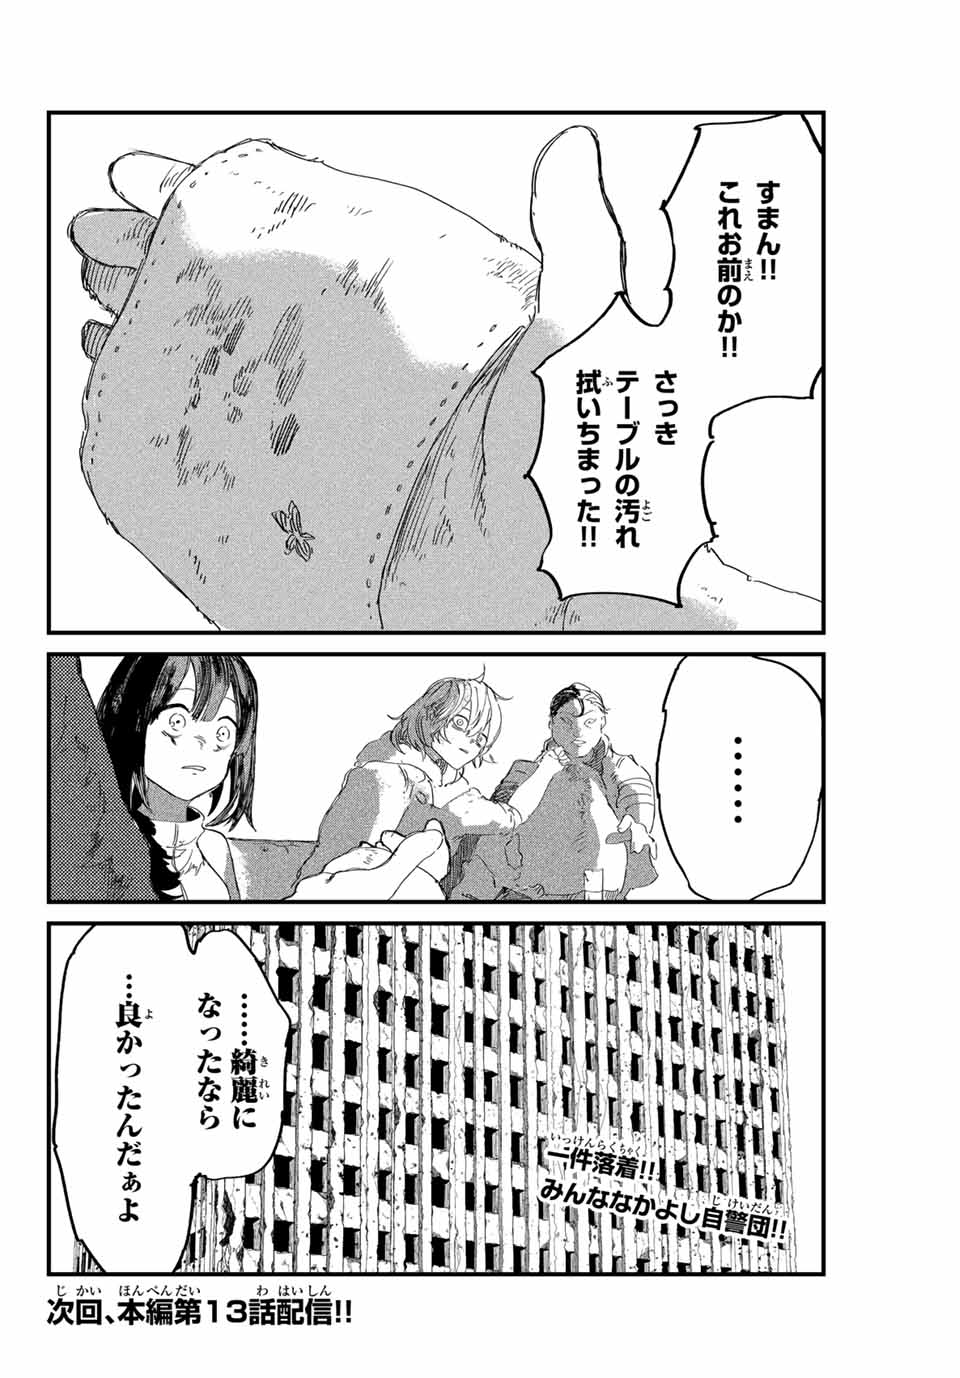 MAN OF RUST 第12.5話 - Page 4